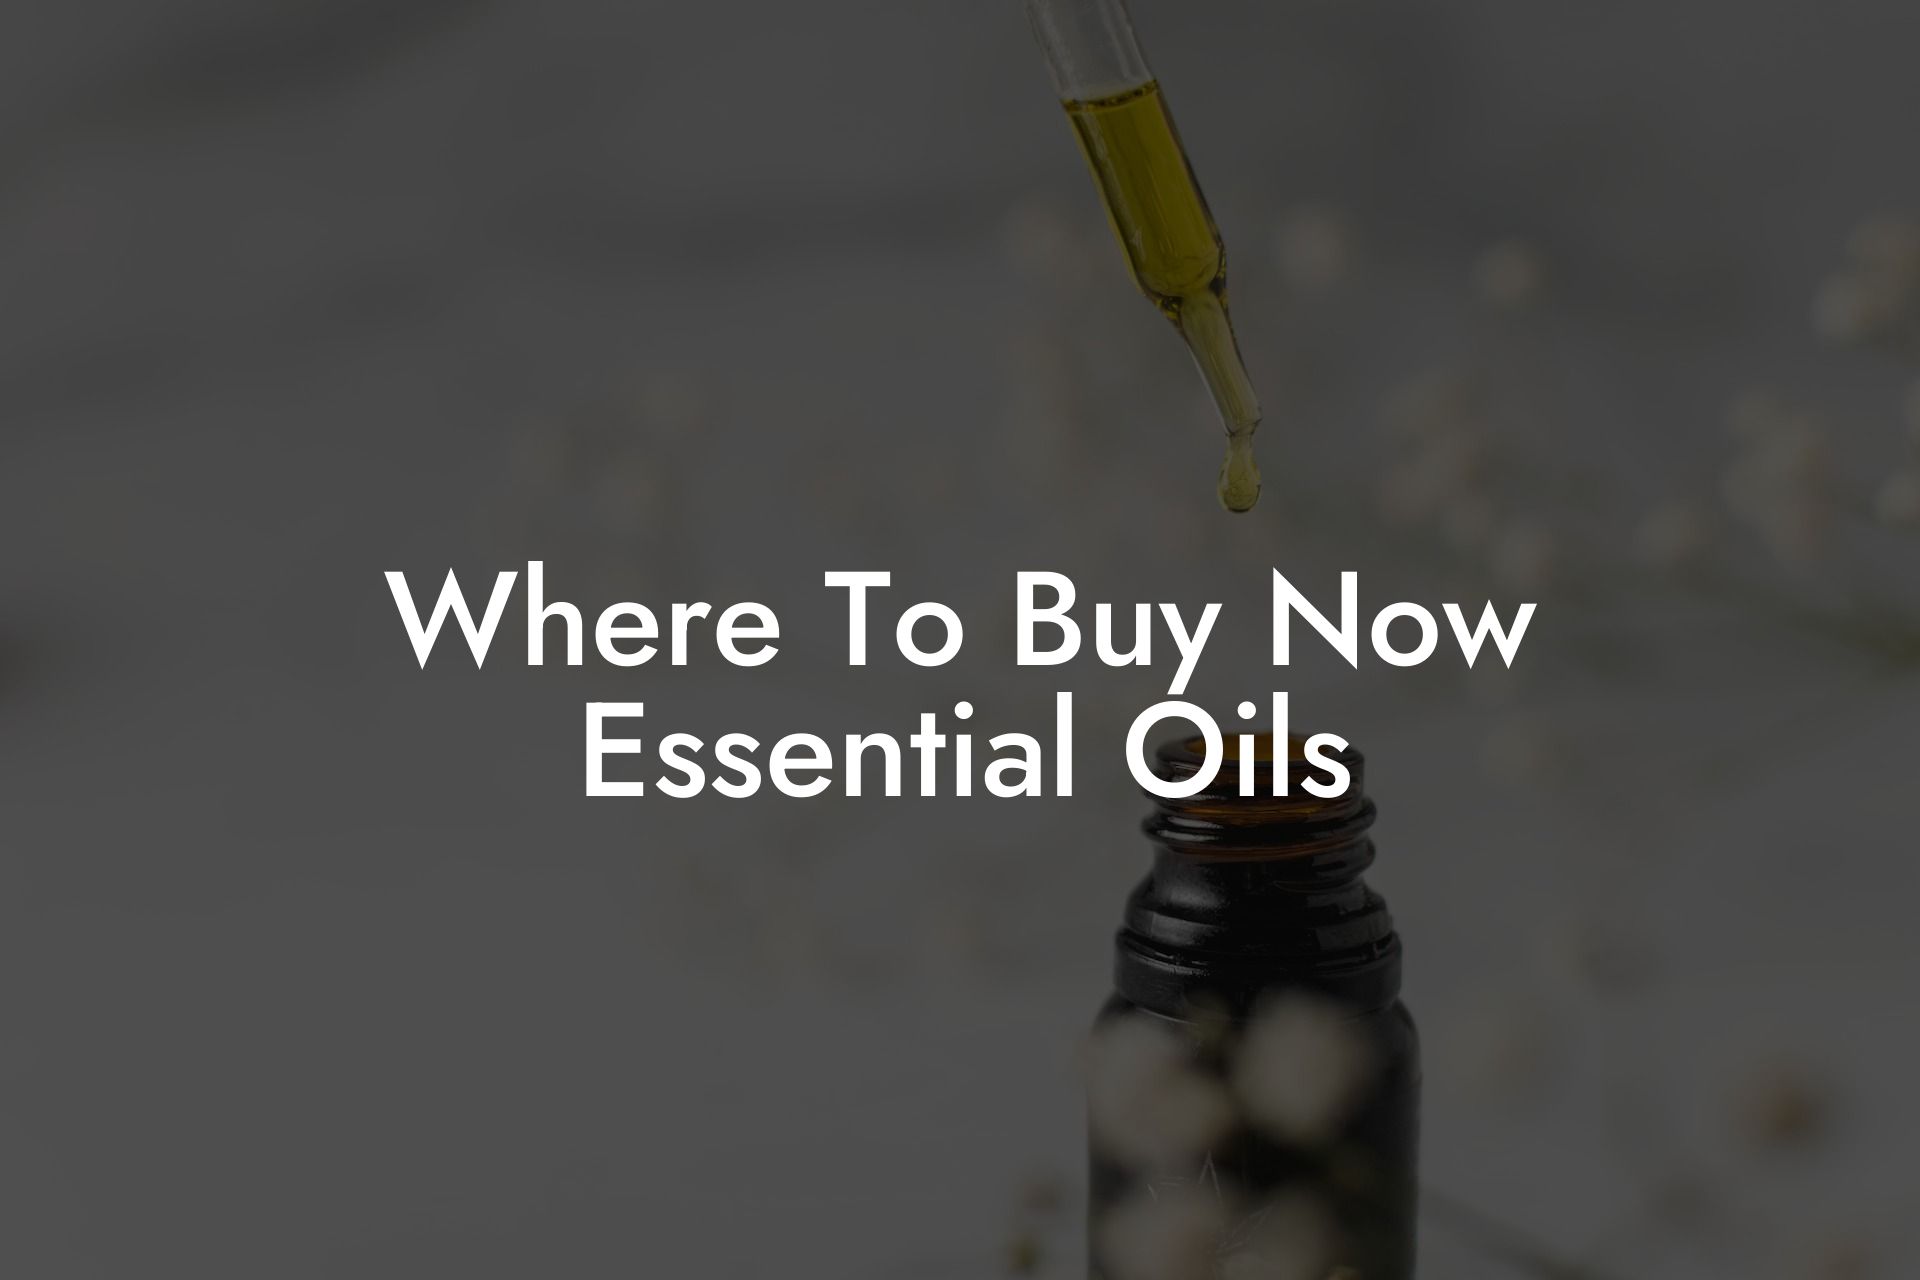 Where To Buy Now Essential Oils